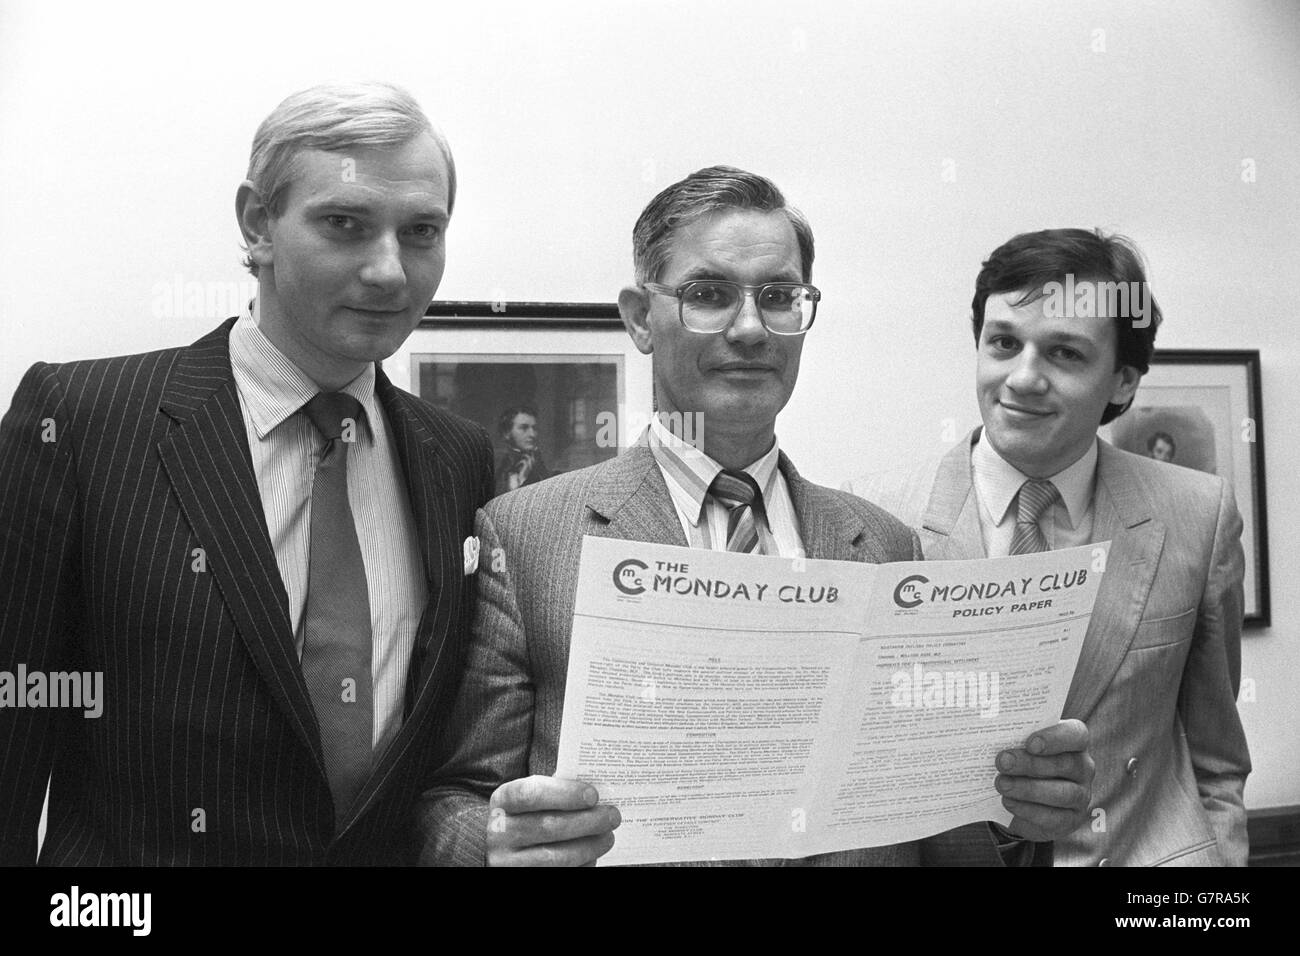 William Ross (centre), MP for Londonderry and chairman of the Conservative Monday Club's Northern Ireland Policy Committee, with the committee's vice-chairman Harvey Proctor (left), MP for Basildon, and political advisor John R Pinniger. They held a press conference at the House of Commons to launch a new policy paper. Stock Photo